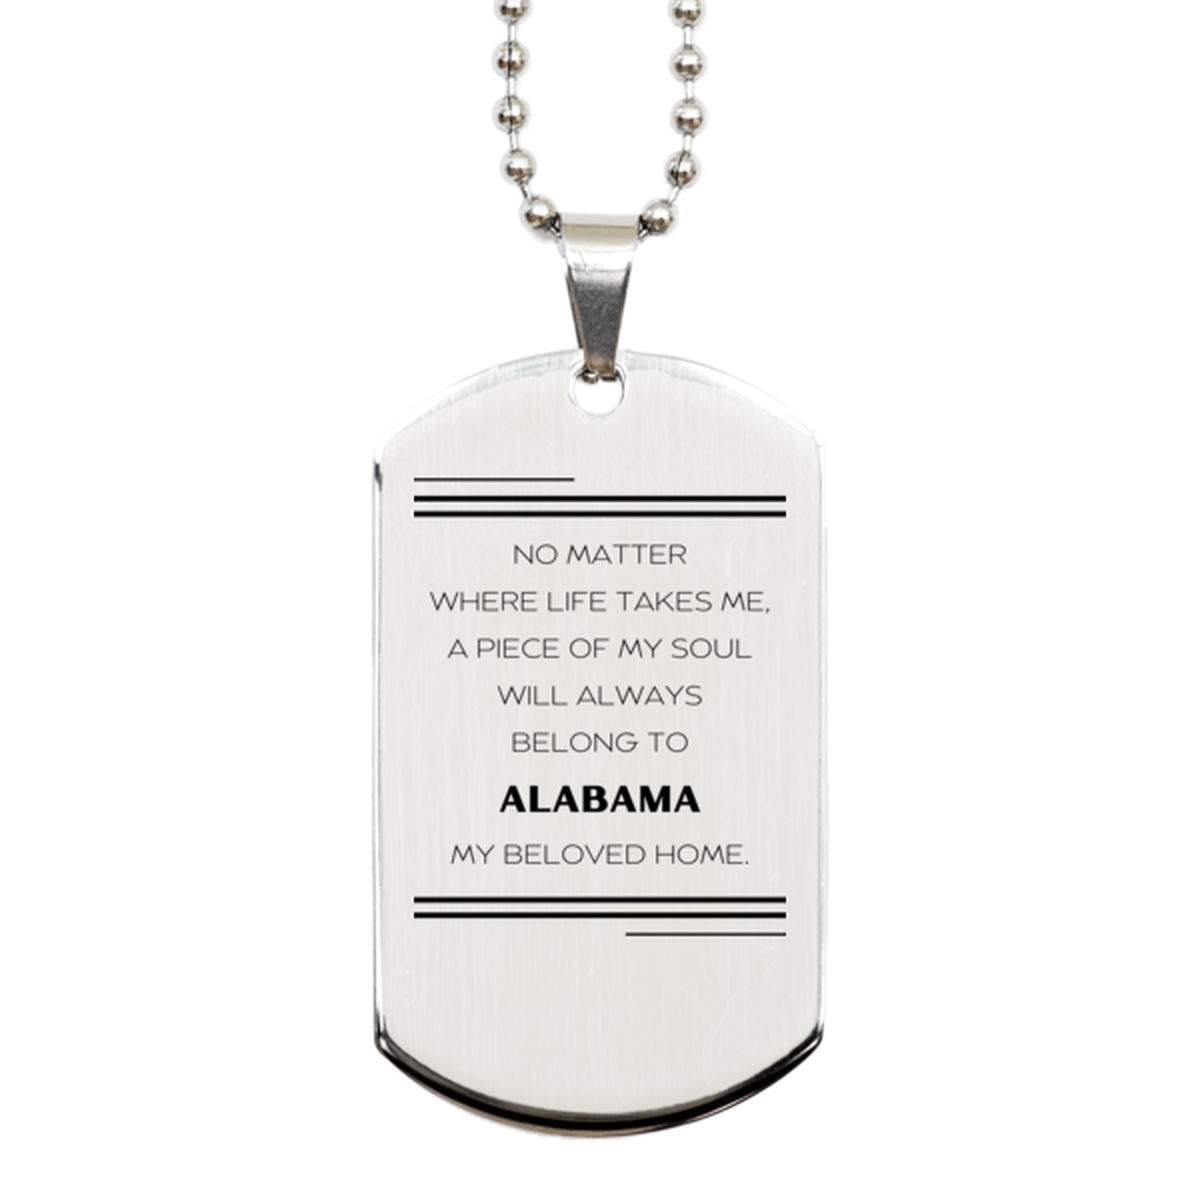 Love Alabama State Gifts, My soul will always belong to Alabama, Proud Silver Dog Tag, Birthday Unique Gifts For Alabama Men, Women, Friends